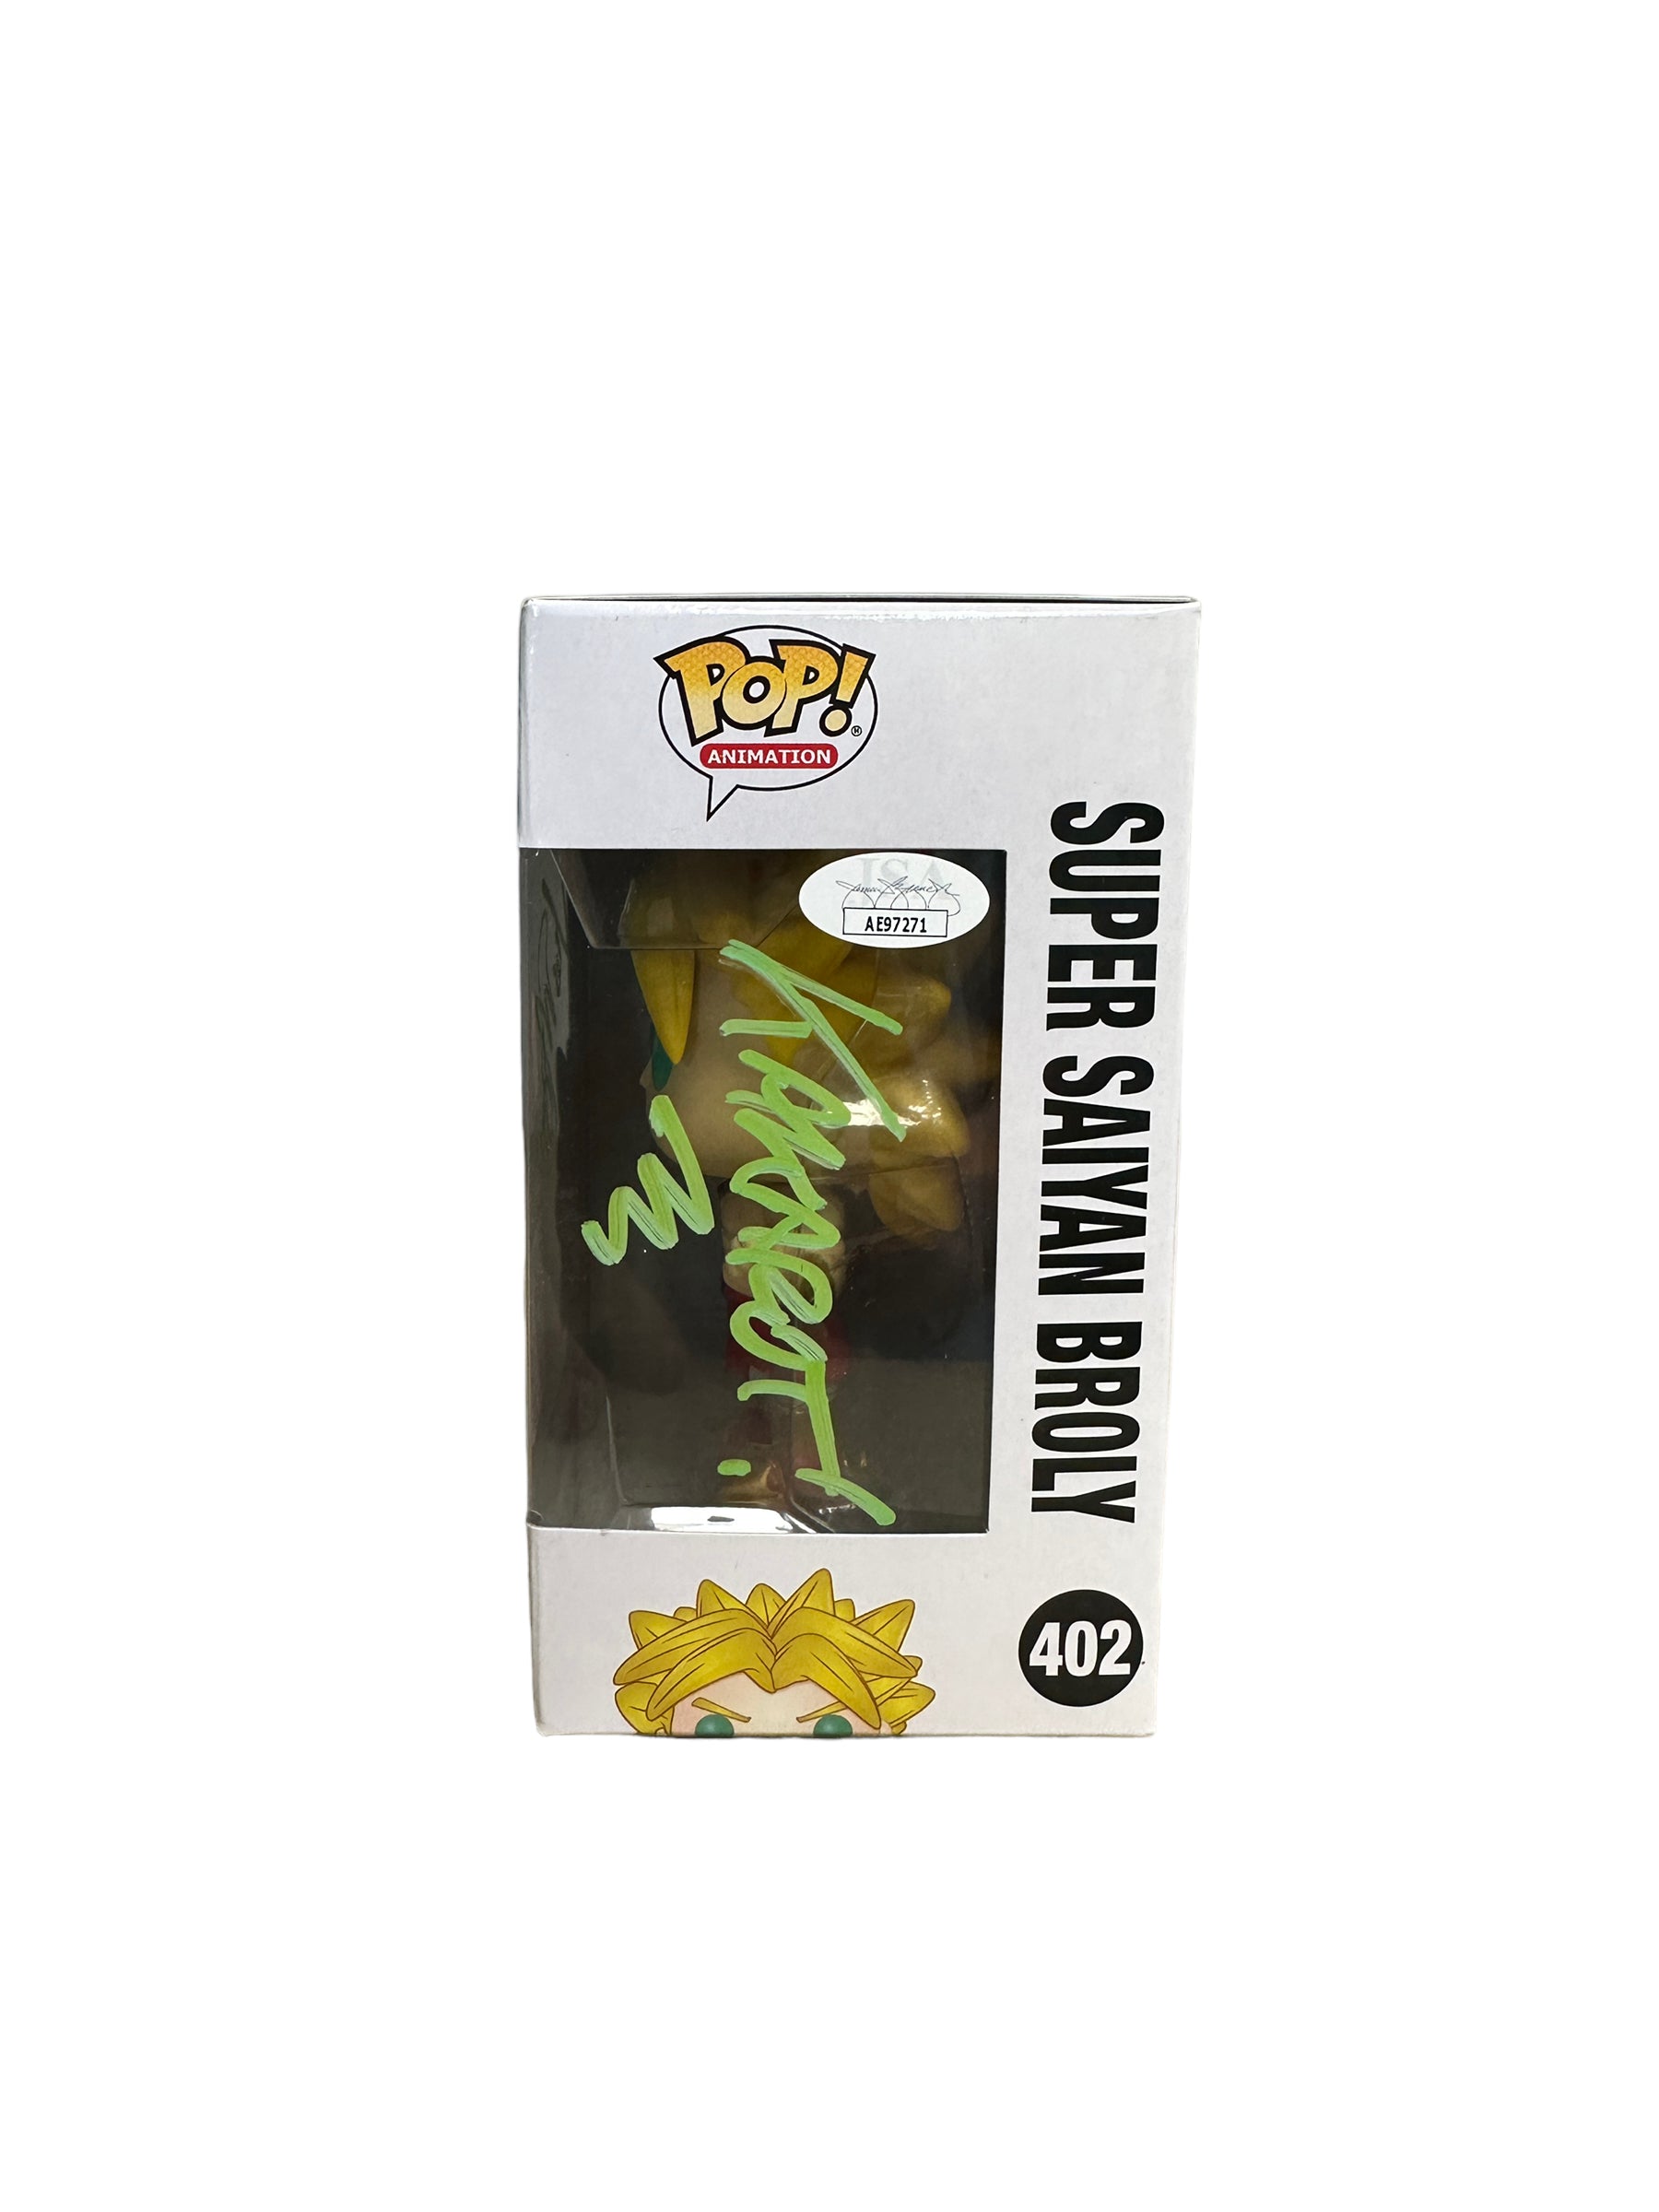 Vic Mignogna Signed Super Saiyan Broly #402 Funko Pop! - Dragon Ball Z - SDCC 2018 Shared Exclusive - Condition 9.5/10 - JSA Authenticated